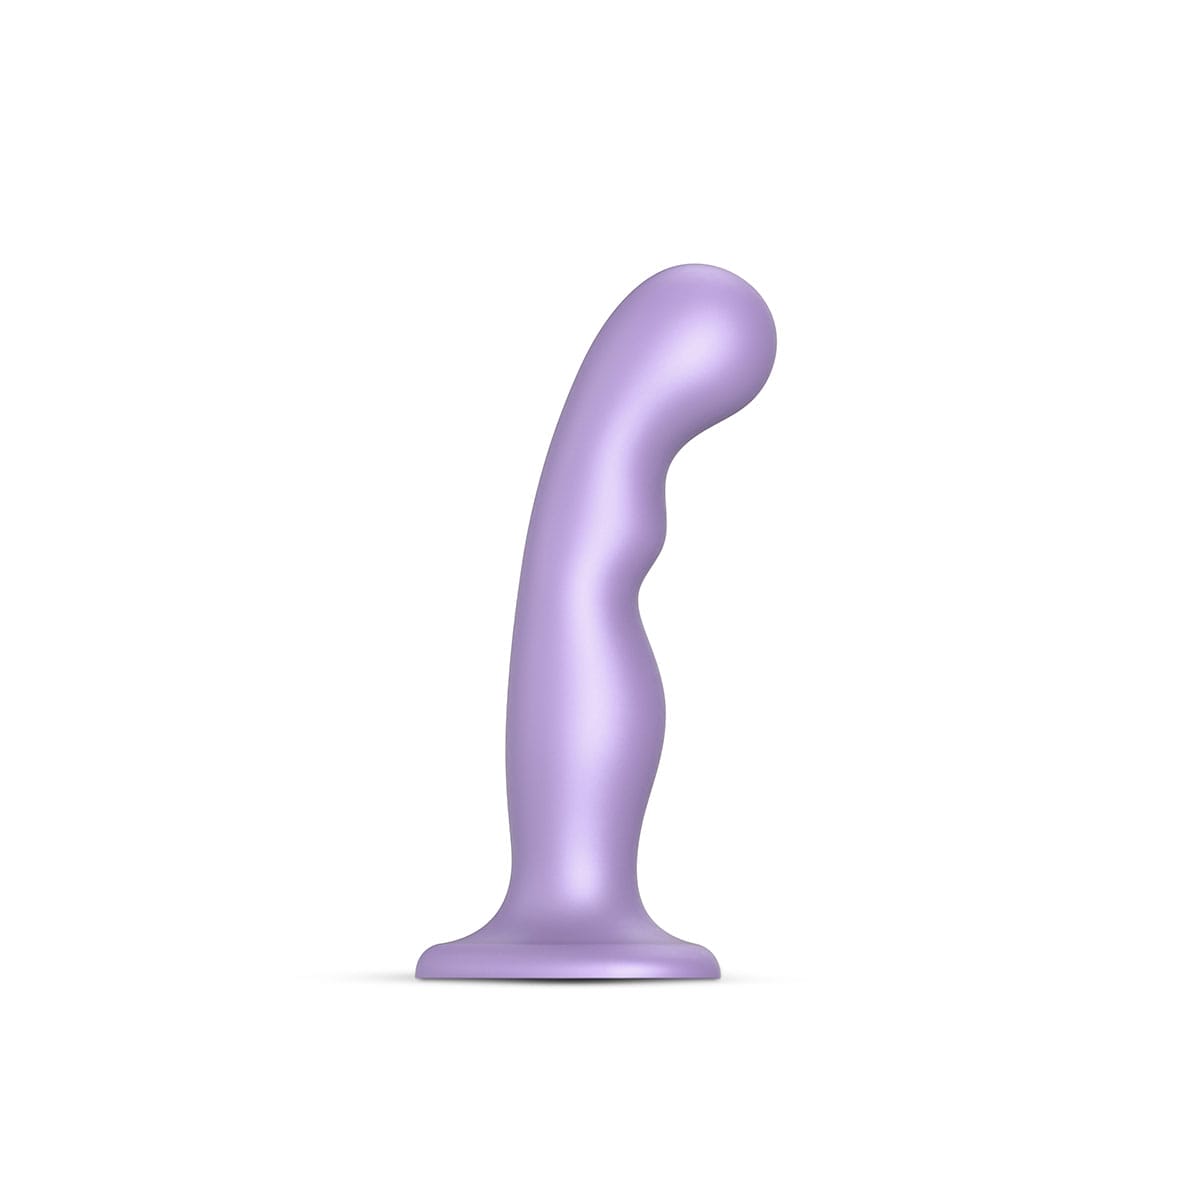 Buy Strap On Me P  and G Plug Dil Metallic Lilac   Large  long and 1.55 thick dildo made by Strap-On-Me.